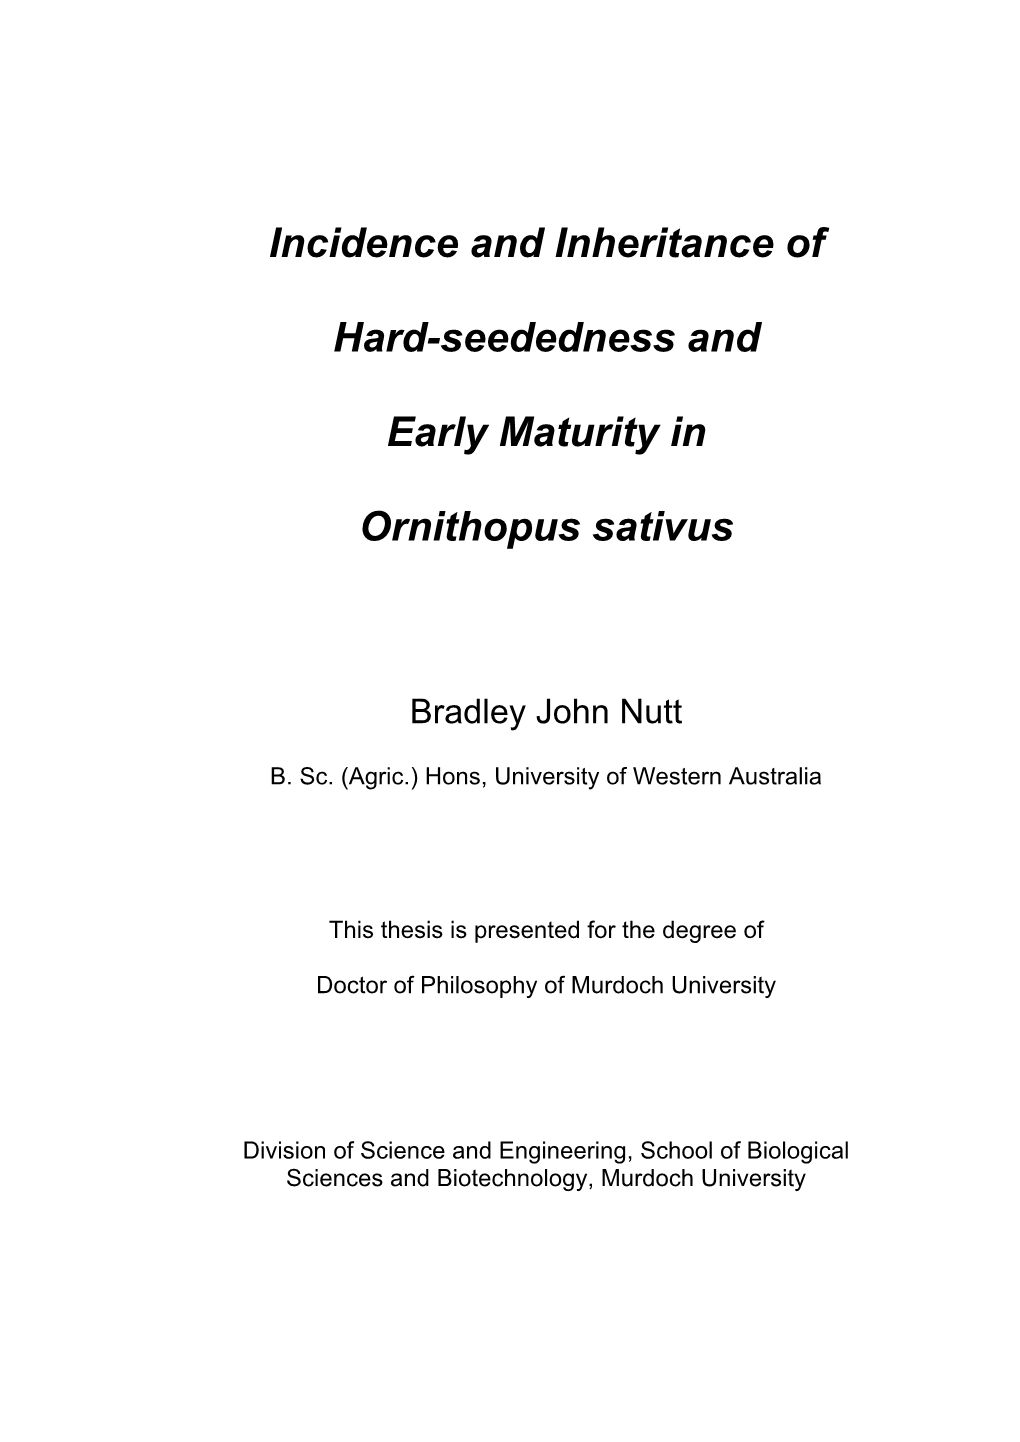 Incidence and Inheritance of Hard-Seededness and Early Maturity in Ornithopus Sativus